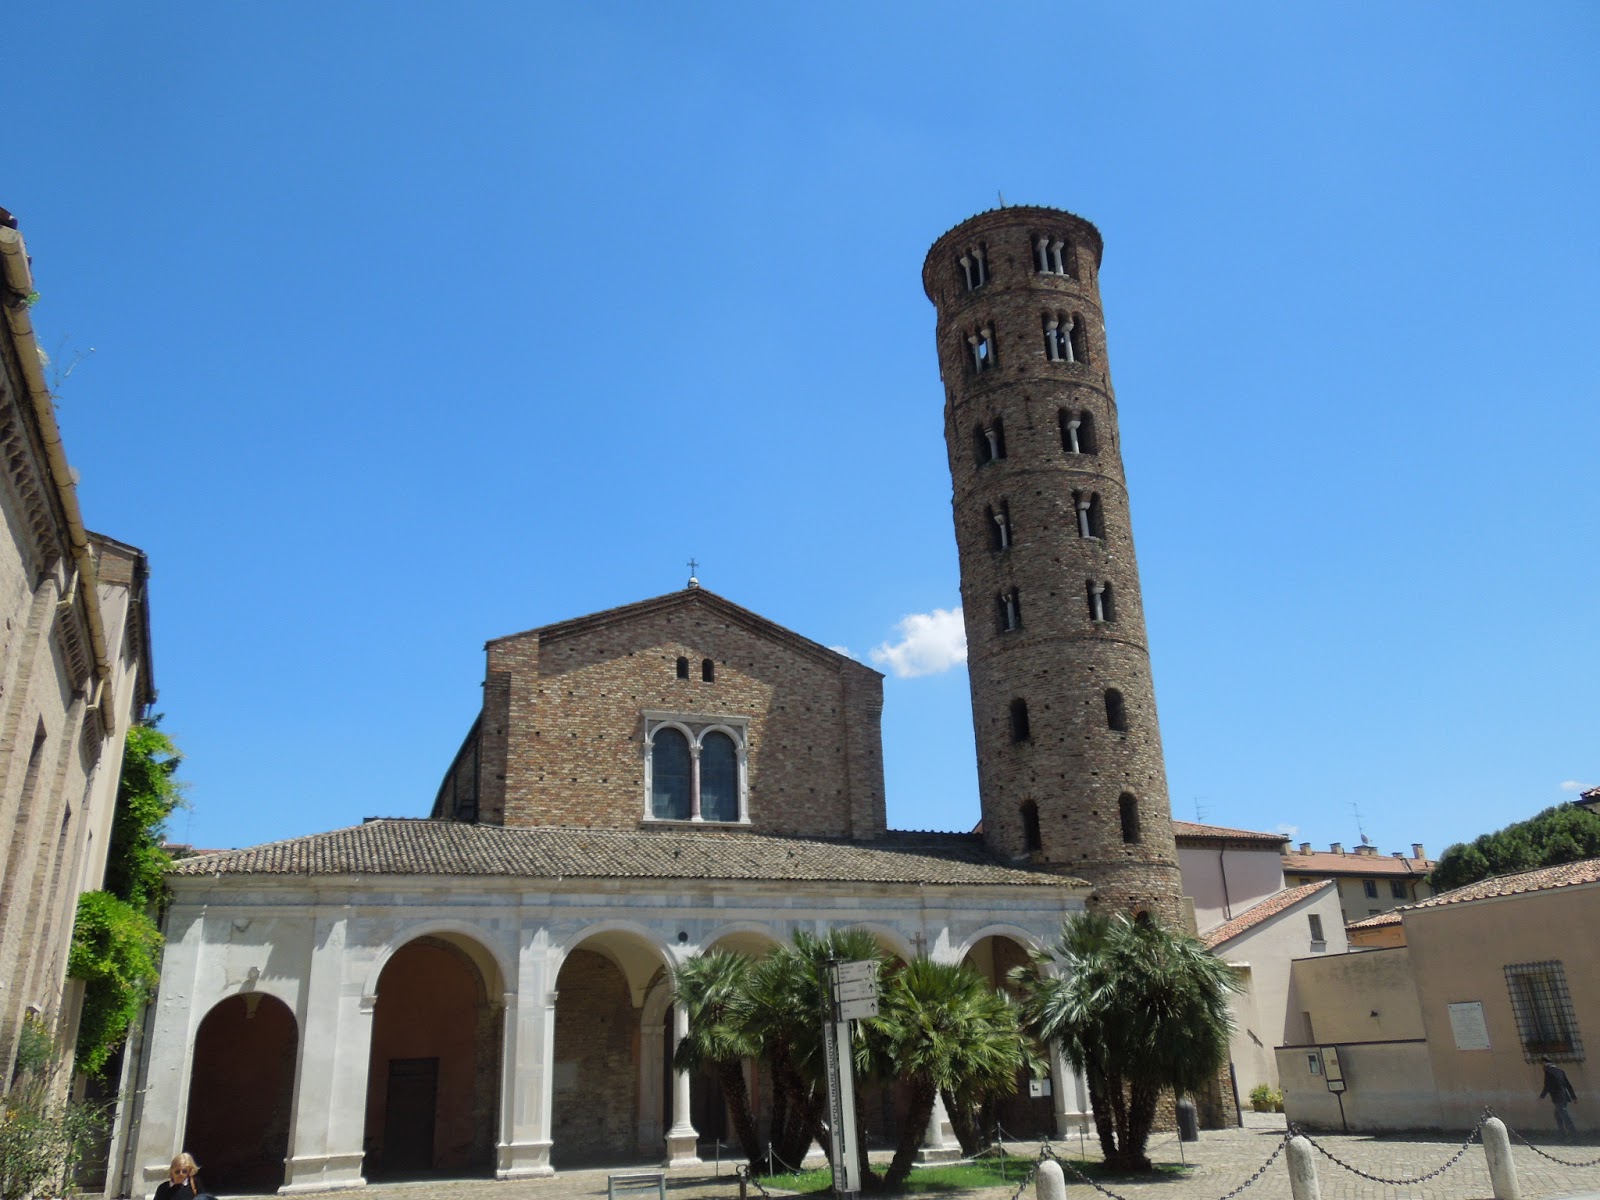 One day in Ravenna, Italy
